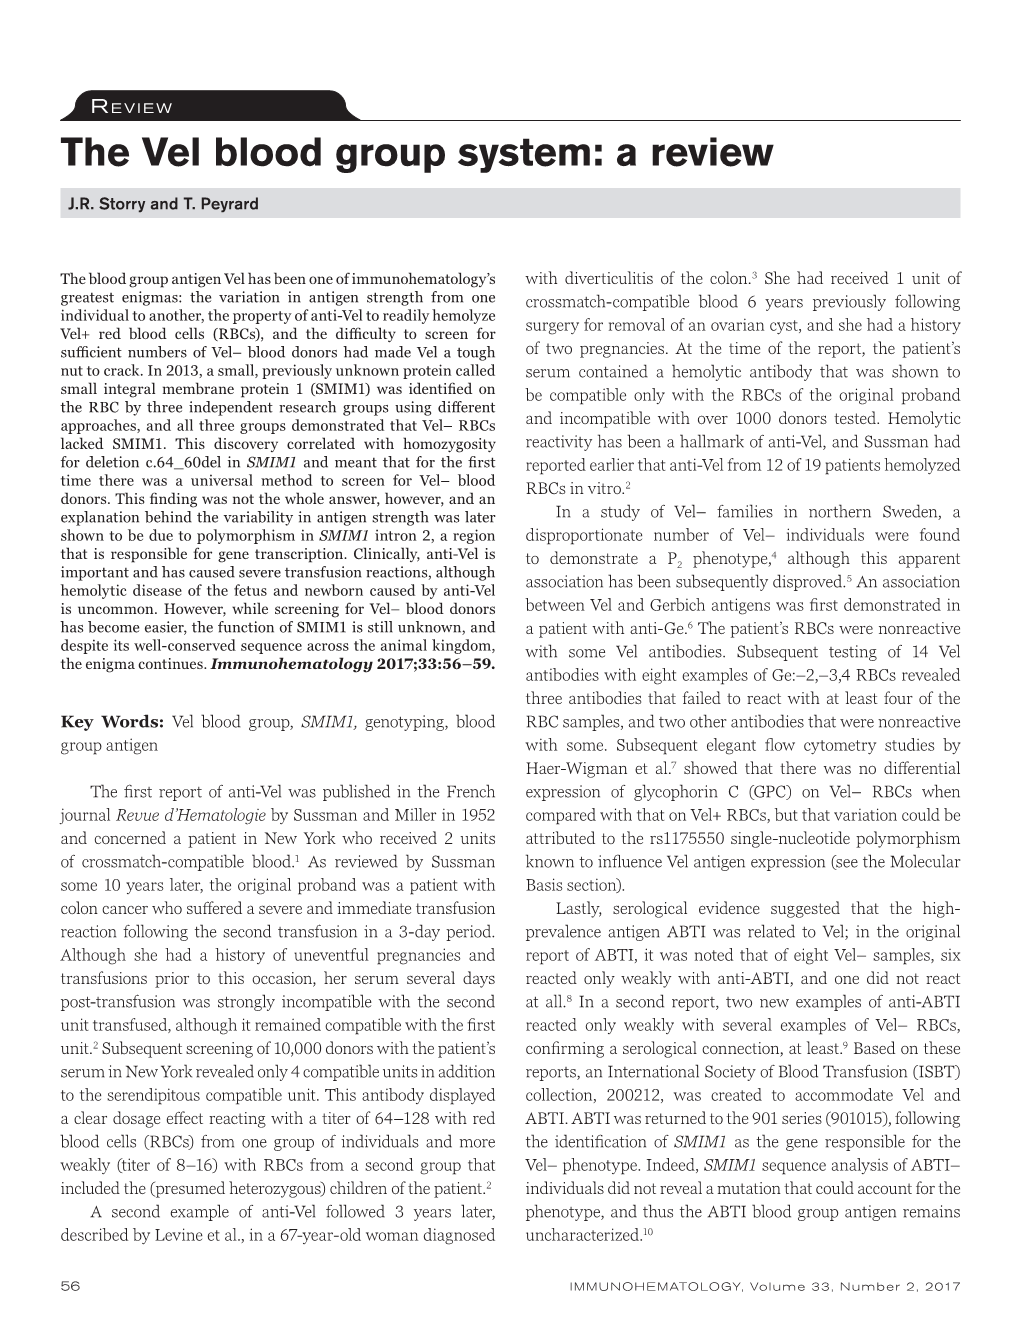 The Vel Blood Group System: a Review